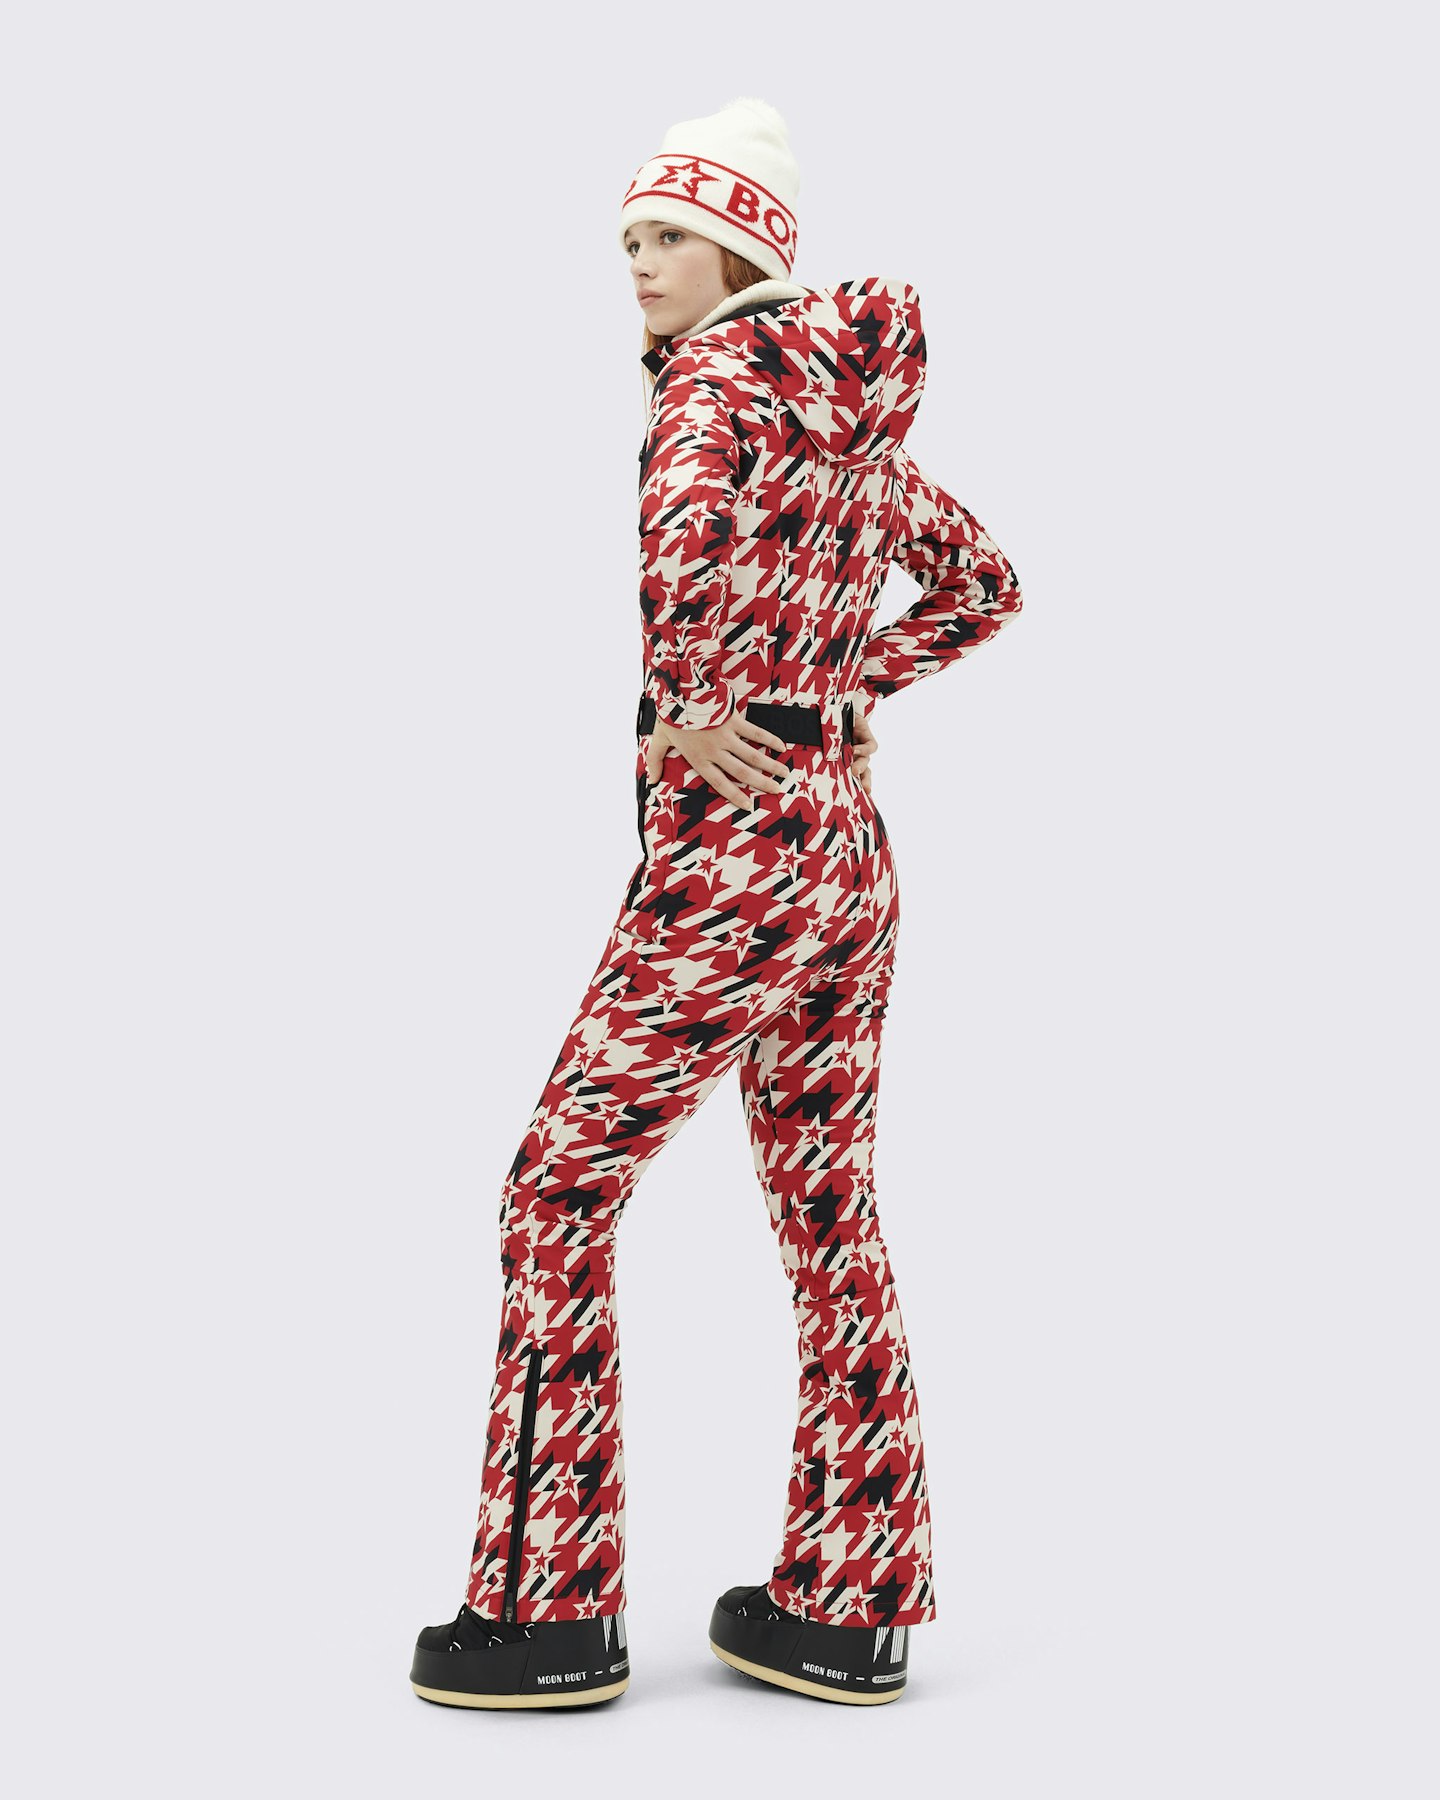 PM x BOSS Houndstooth Ski Suit 2